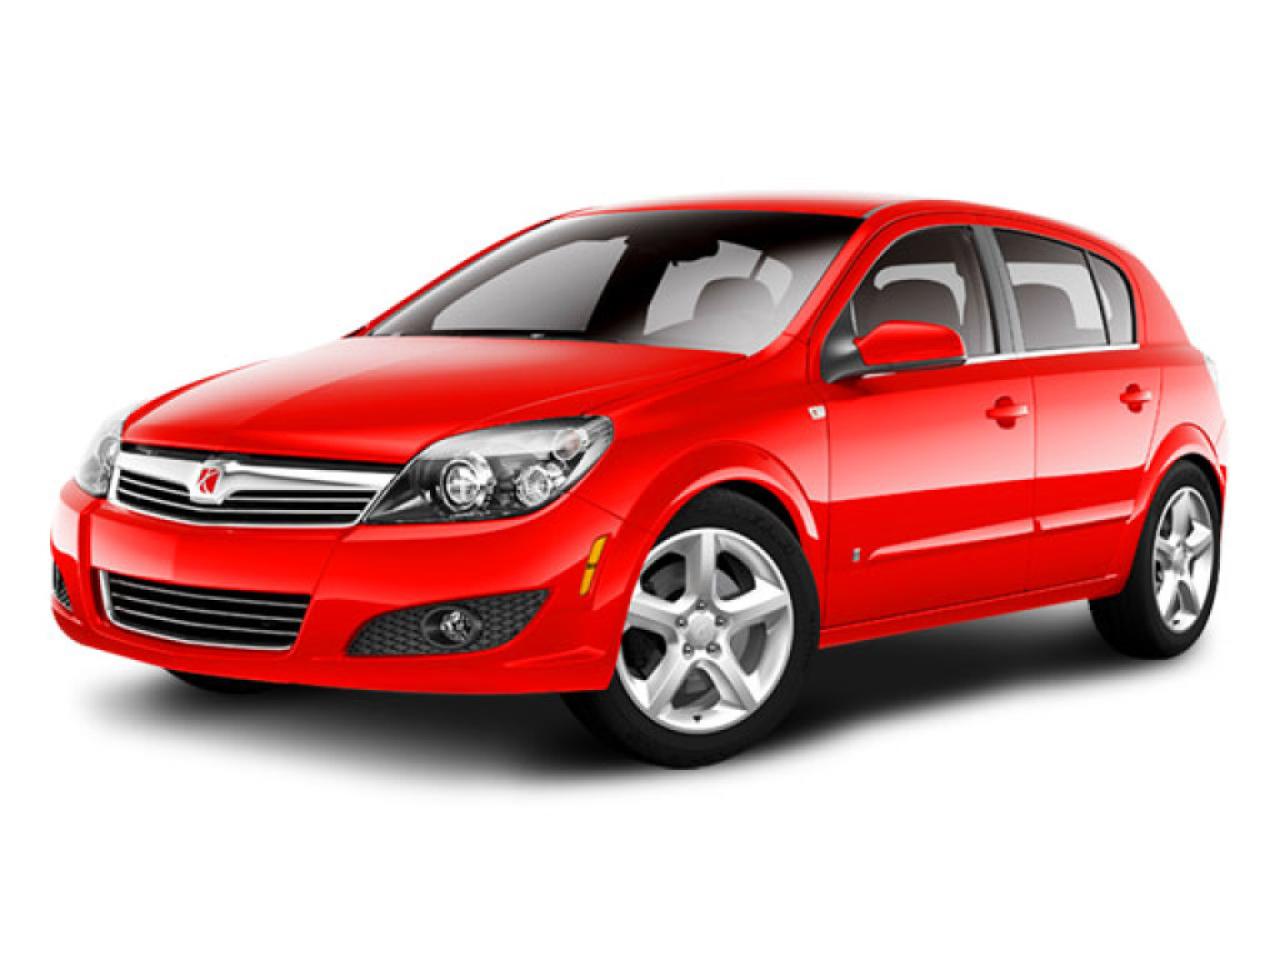 Used 2009 Saturn Astra XR for Sale in West Kelowna, British Columbia ...